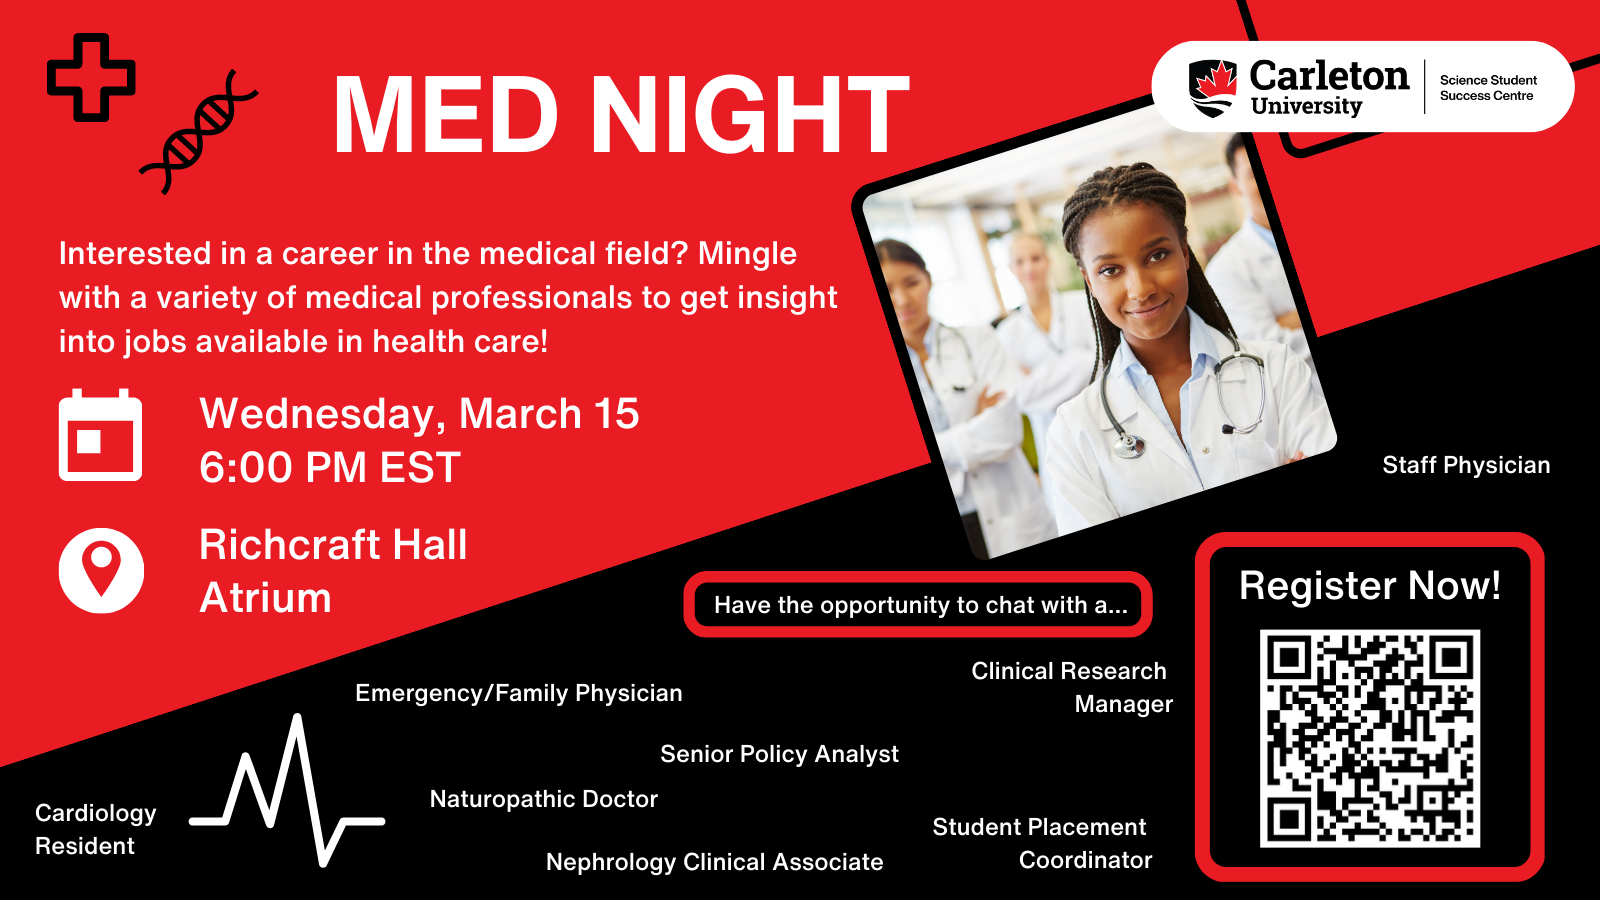 Poster with text. Top half red and bottom half black. Split diagonally with left side lower. Top right shows Carleton University, Science Student Success Centre logo in a white horizontal circle. Square image of a doctor placed near the top right diagonally of a doctor smiling. Text on red background section reads: MED NIGHT. Interested in a career in the medical field? Mingle with a variety of medical professionals to get insight into jobs available in health care! Calendar: Wednesday, March 15 6:00 PM EST. Location: Richcraft Hall Atrium. Text on black background section reads: Have the opportunity to chat with a... Staff Physician, Emergency/Family Physician, Clinical Research Manager, Senior Policy Analyst, Cardiology Resident, Naturopathic Doctor, Nephrology Clinical Associate, Student Placement Coordinator. Within a red box, text reads: Register Now!, and a QR code is underneath the text. 